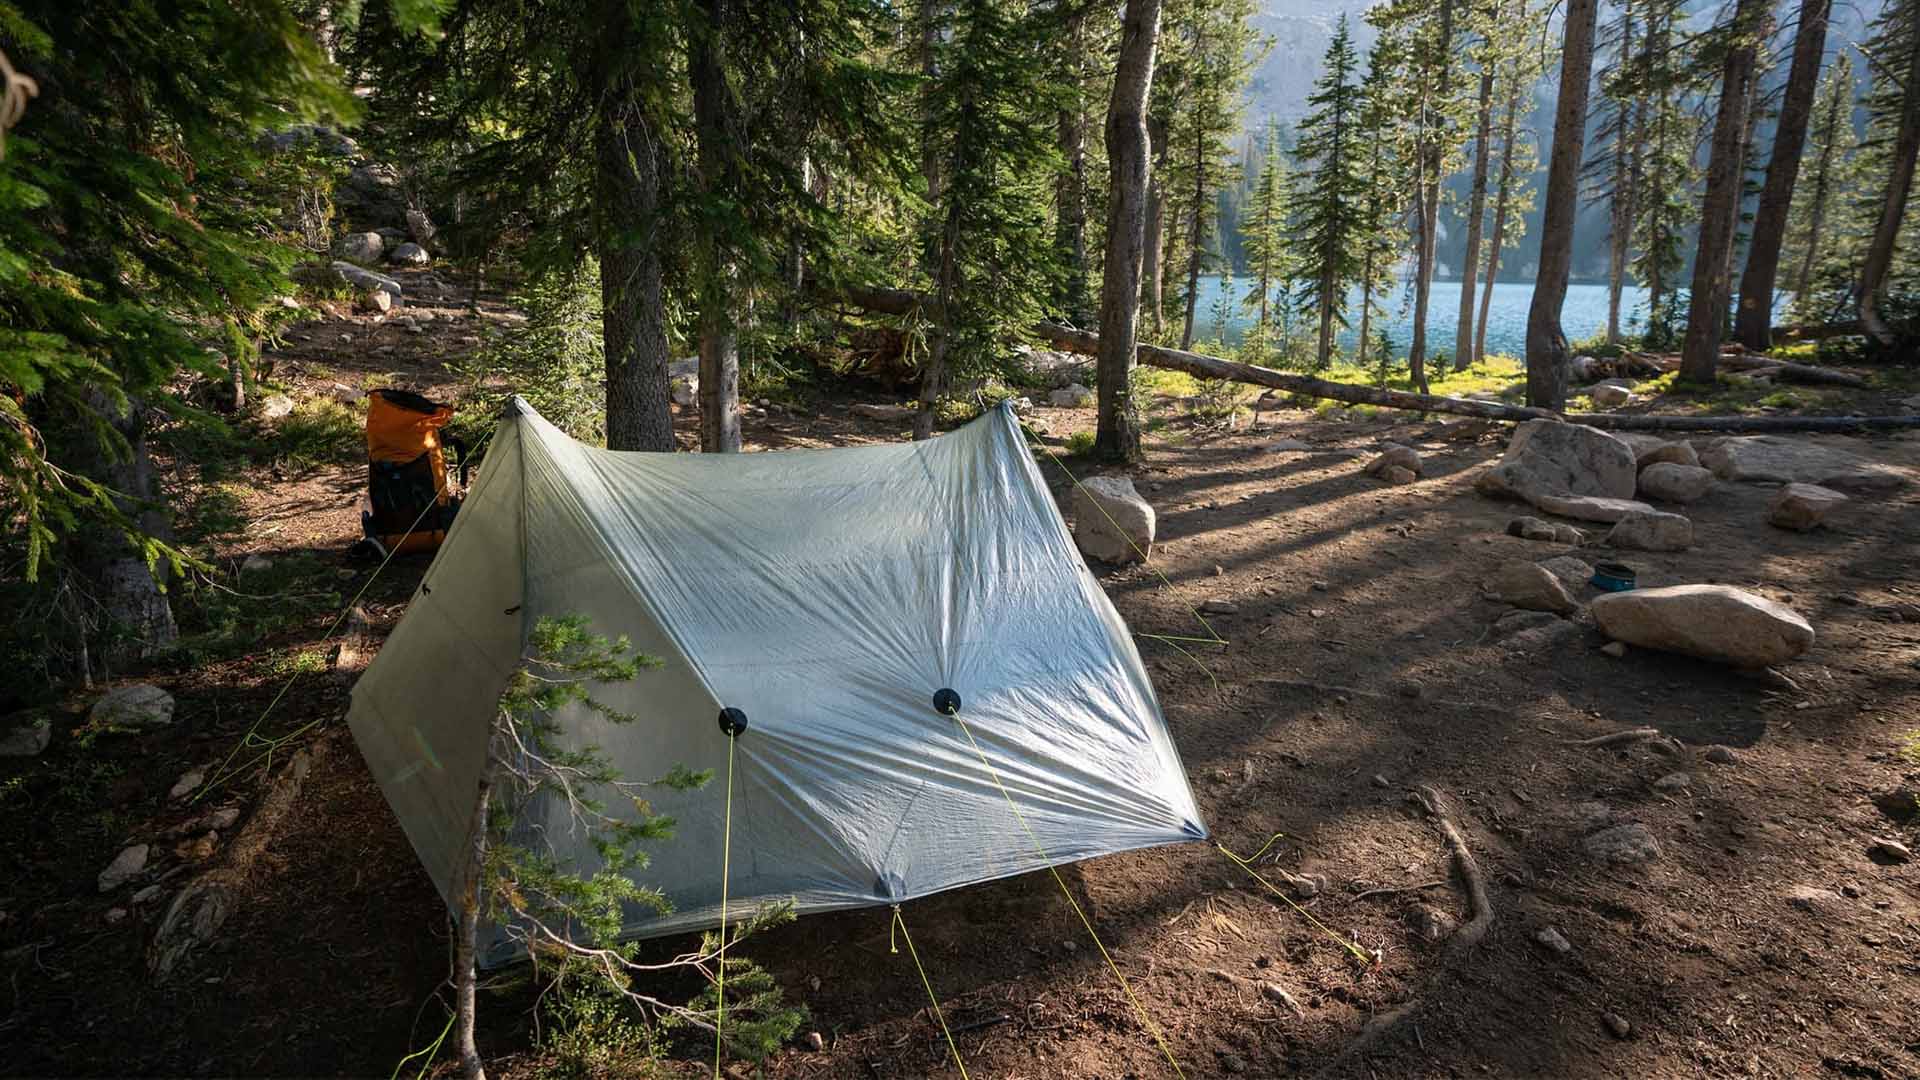 camp more sustainably